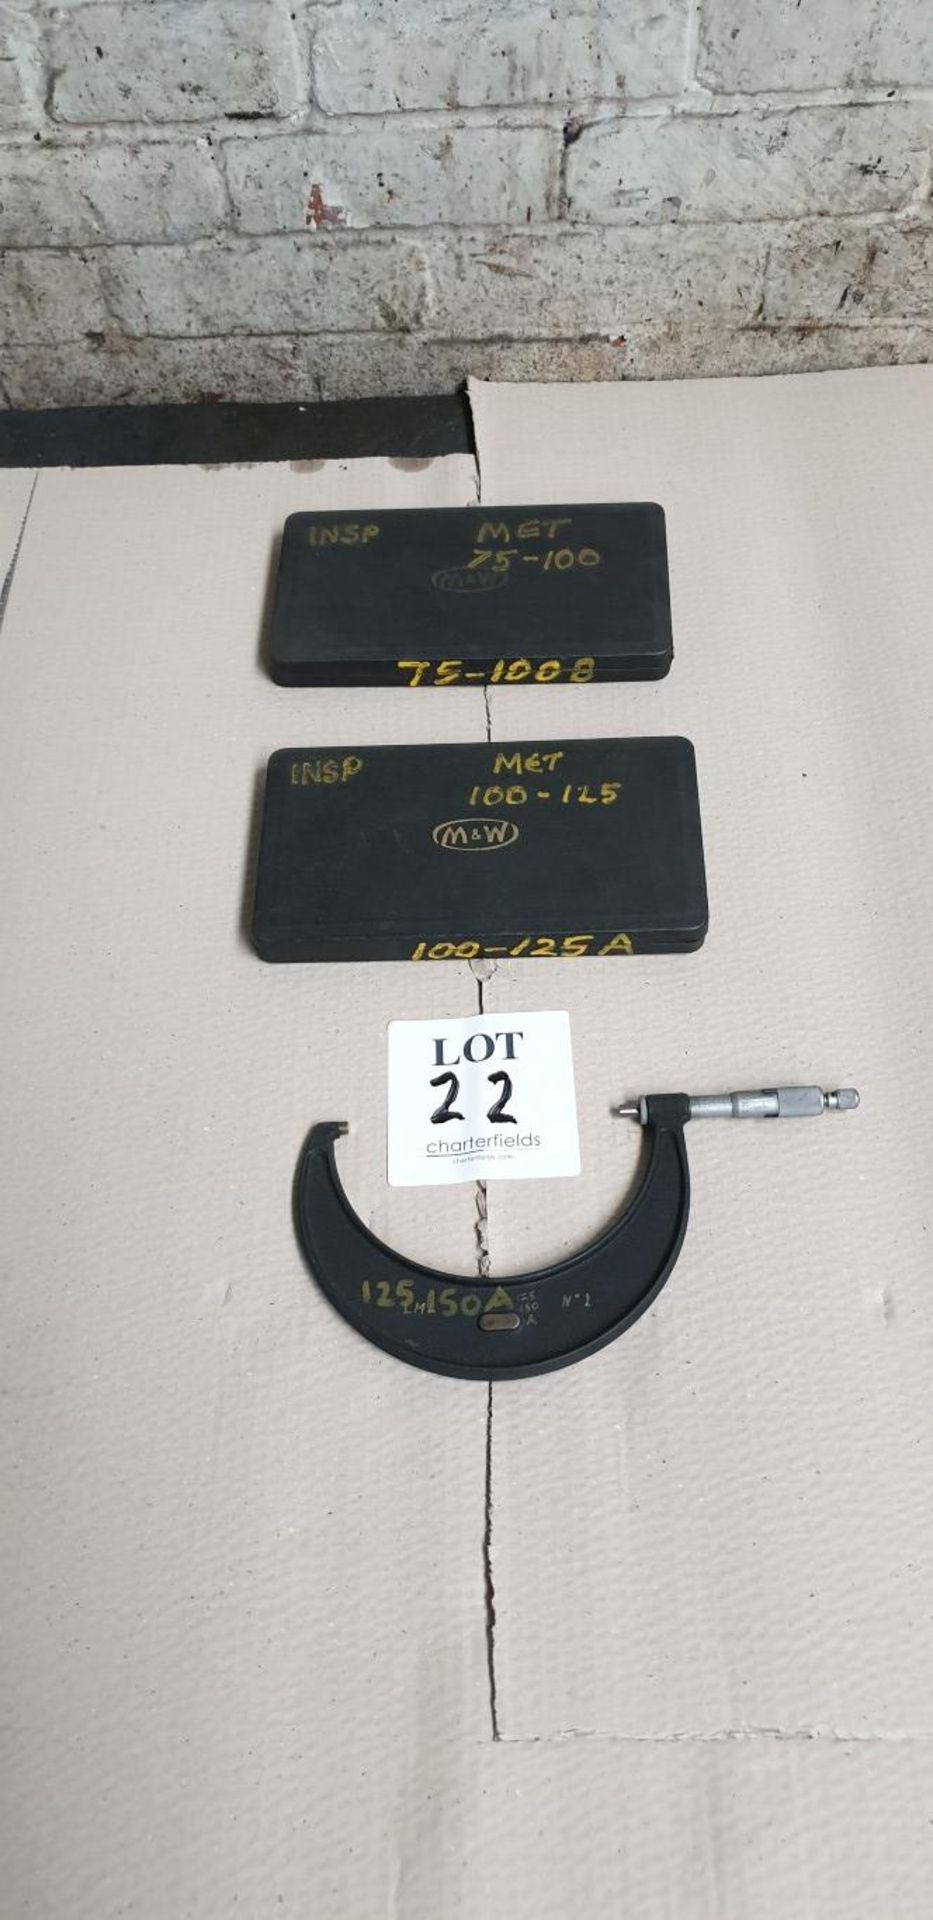 3 - metric micrometers; 75 - 100mm, 100 - 125mm and 125 - 150mm